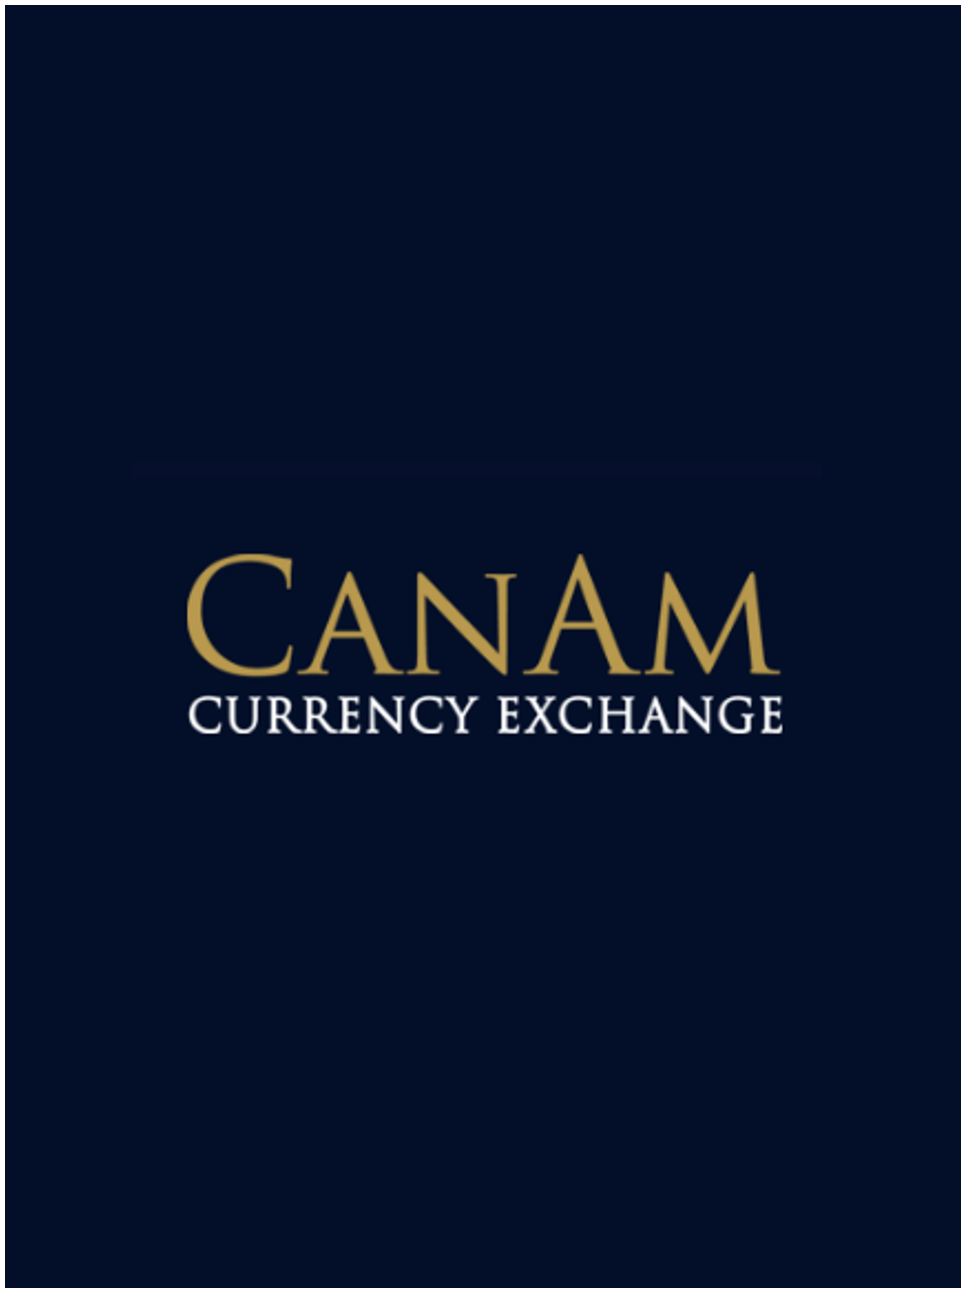 CanAm Currency Exchange: Private Gold & Silver Bullion Sales Driven by Inflation